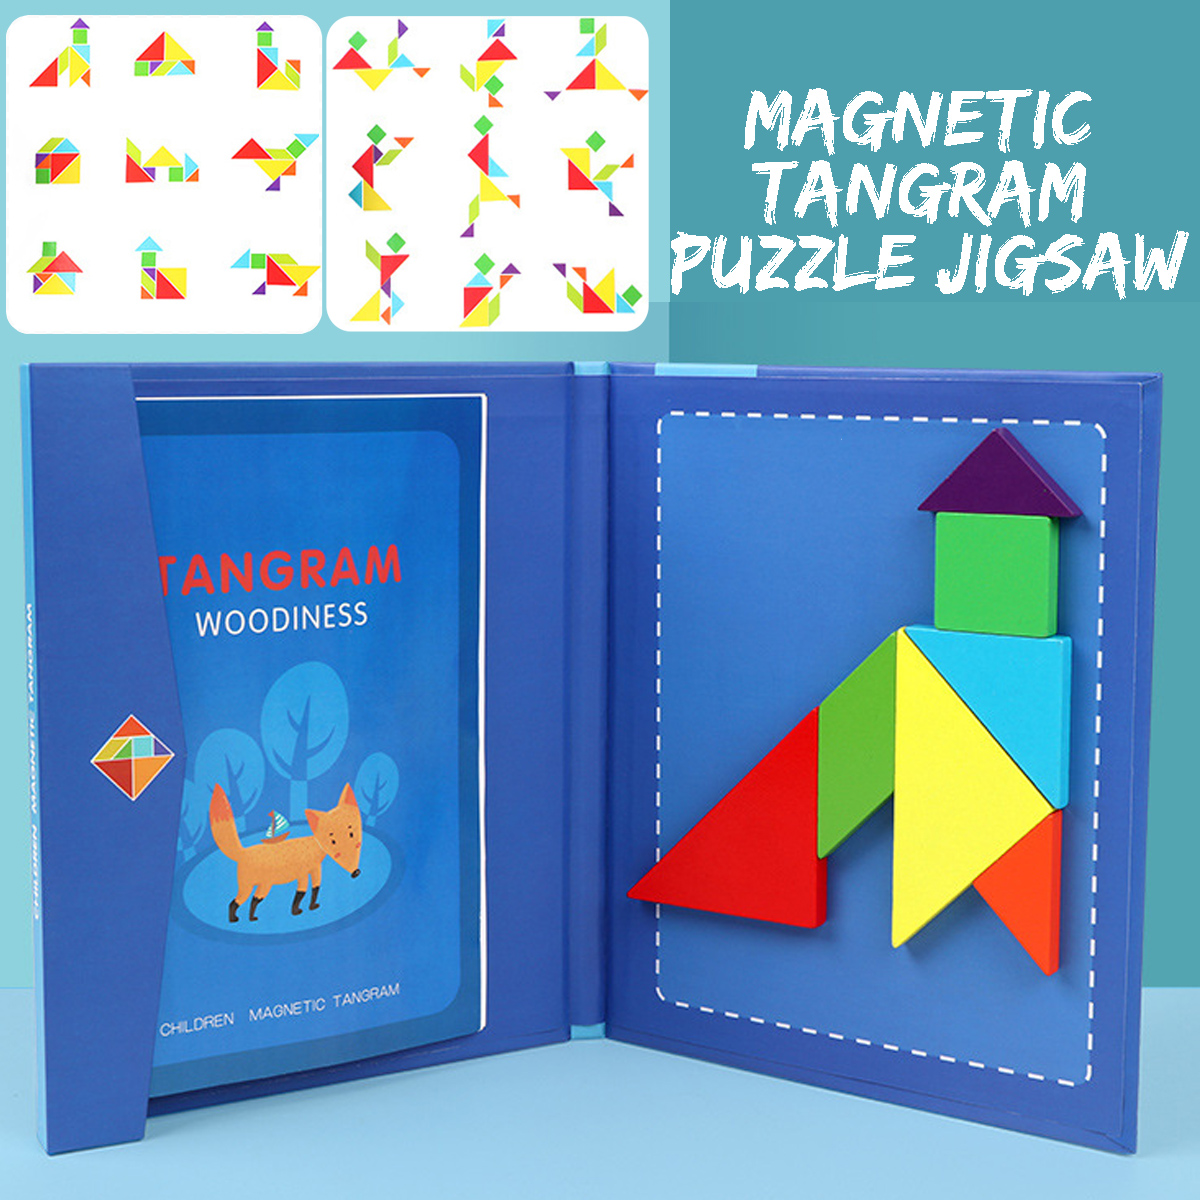 Kids-Child-Magnetic-Tangram-Jigsaw-Puzzle-Toy-Creative-Shape-DIY-Wooden-Puzzles-Montessori-1621514-1